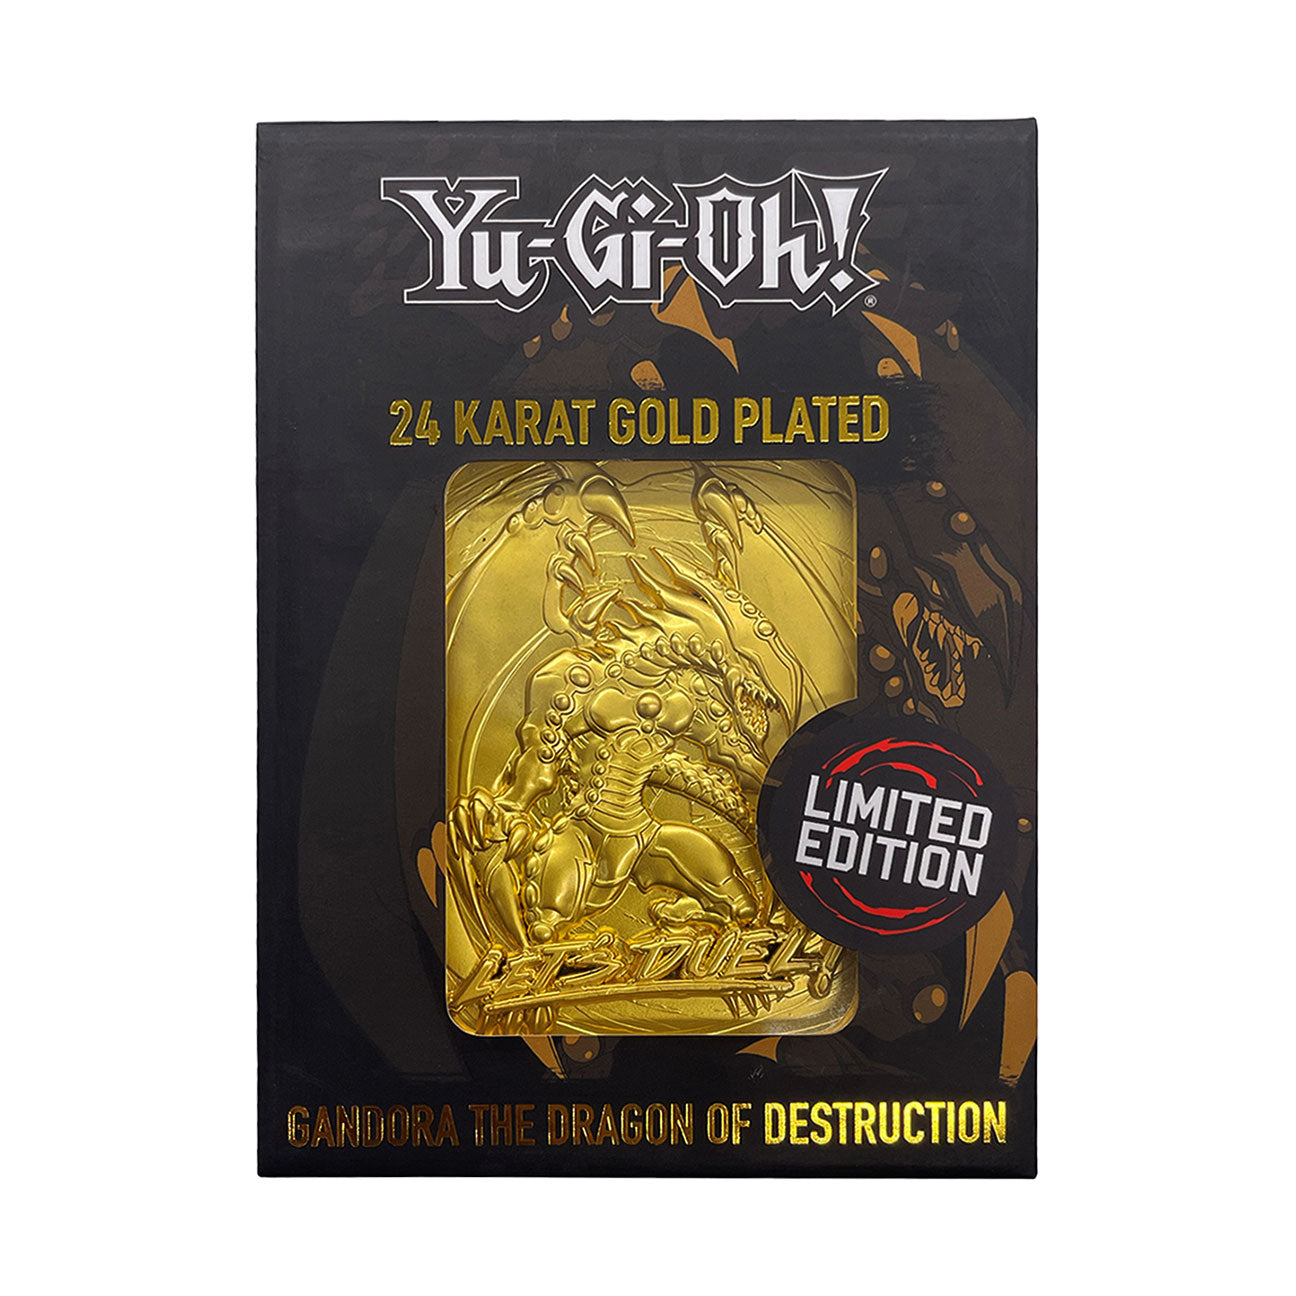 Yu-Gi-Oh! Limited Edition 24k Gold Plated Gandra the Dragon of Destruction Metal Card